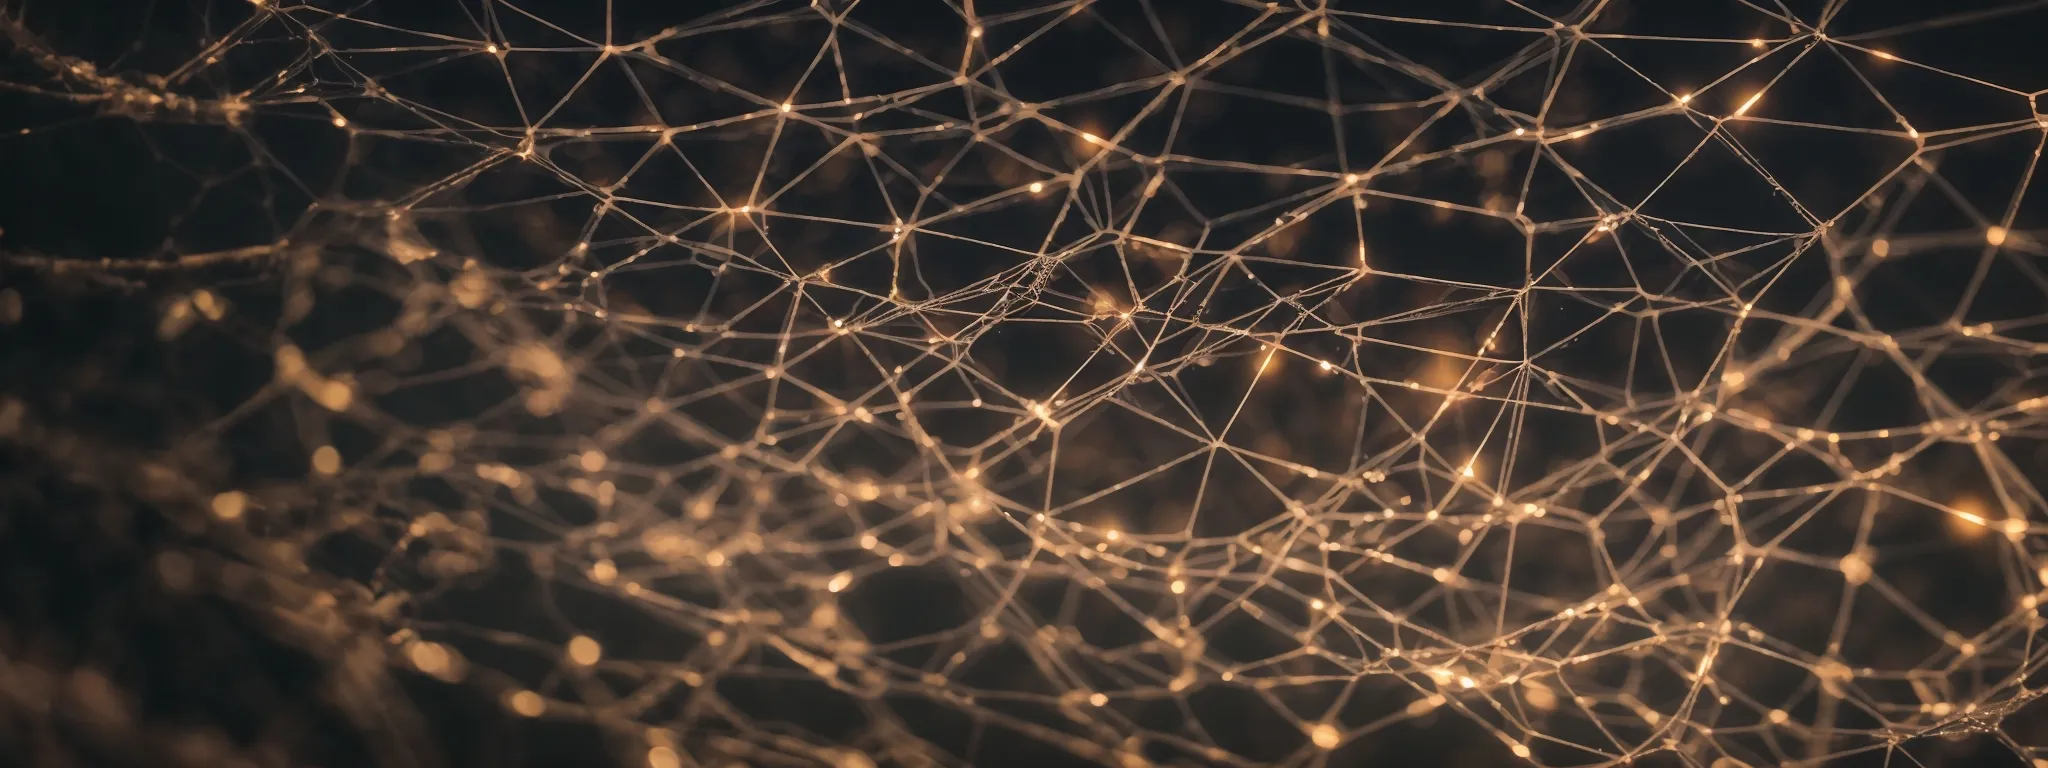 a magnifying glass hovering over a web of interconnected nodes, symbolizing the intricate network of semantic connections.